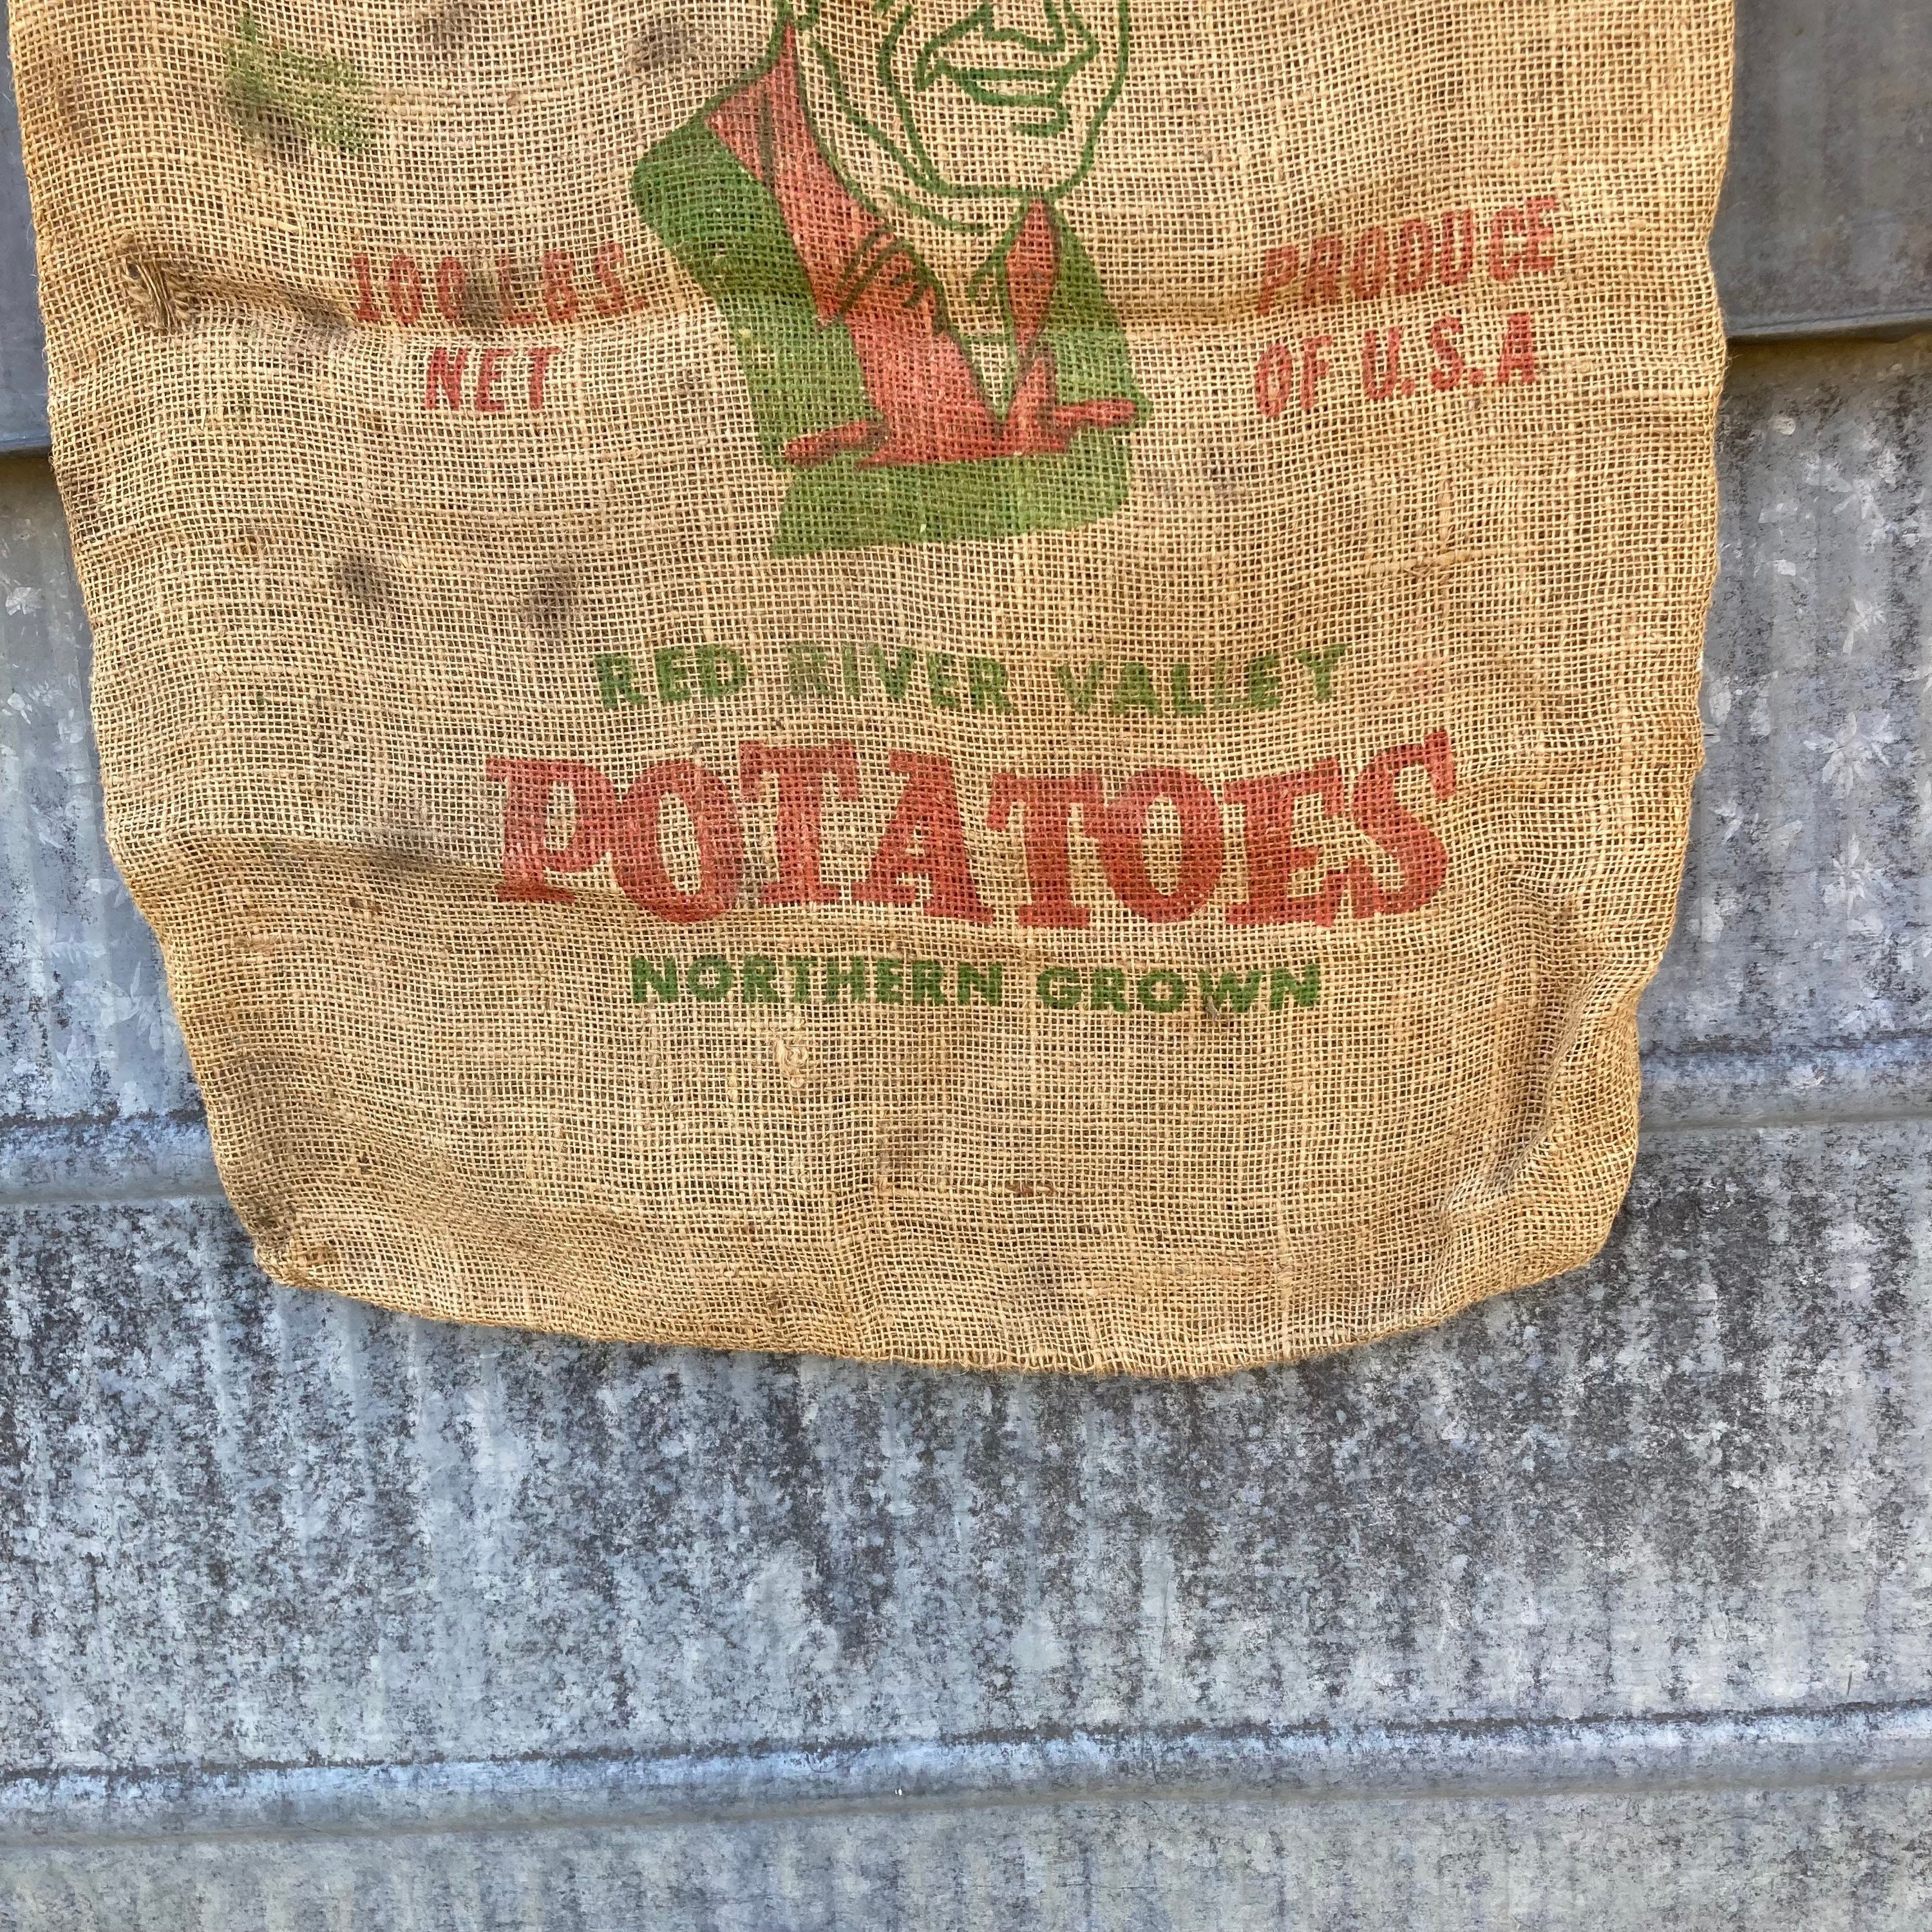 Vintage Farmers Finest Red River Valley Potatoes Burlap Sack   Etsy